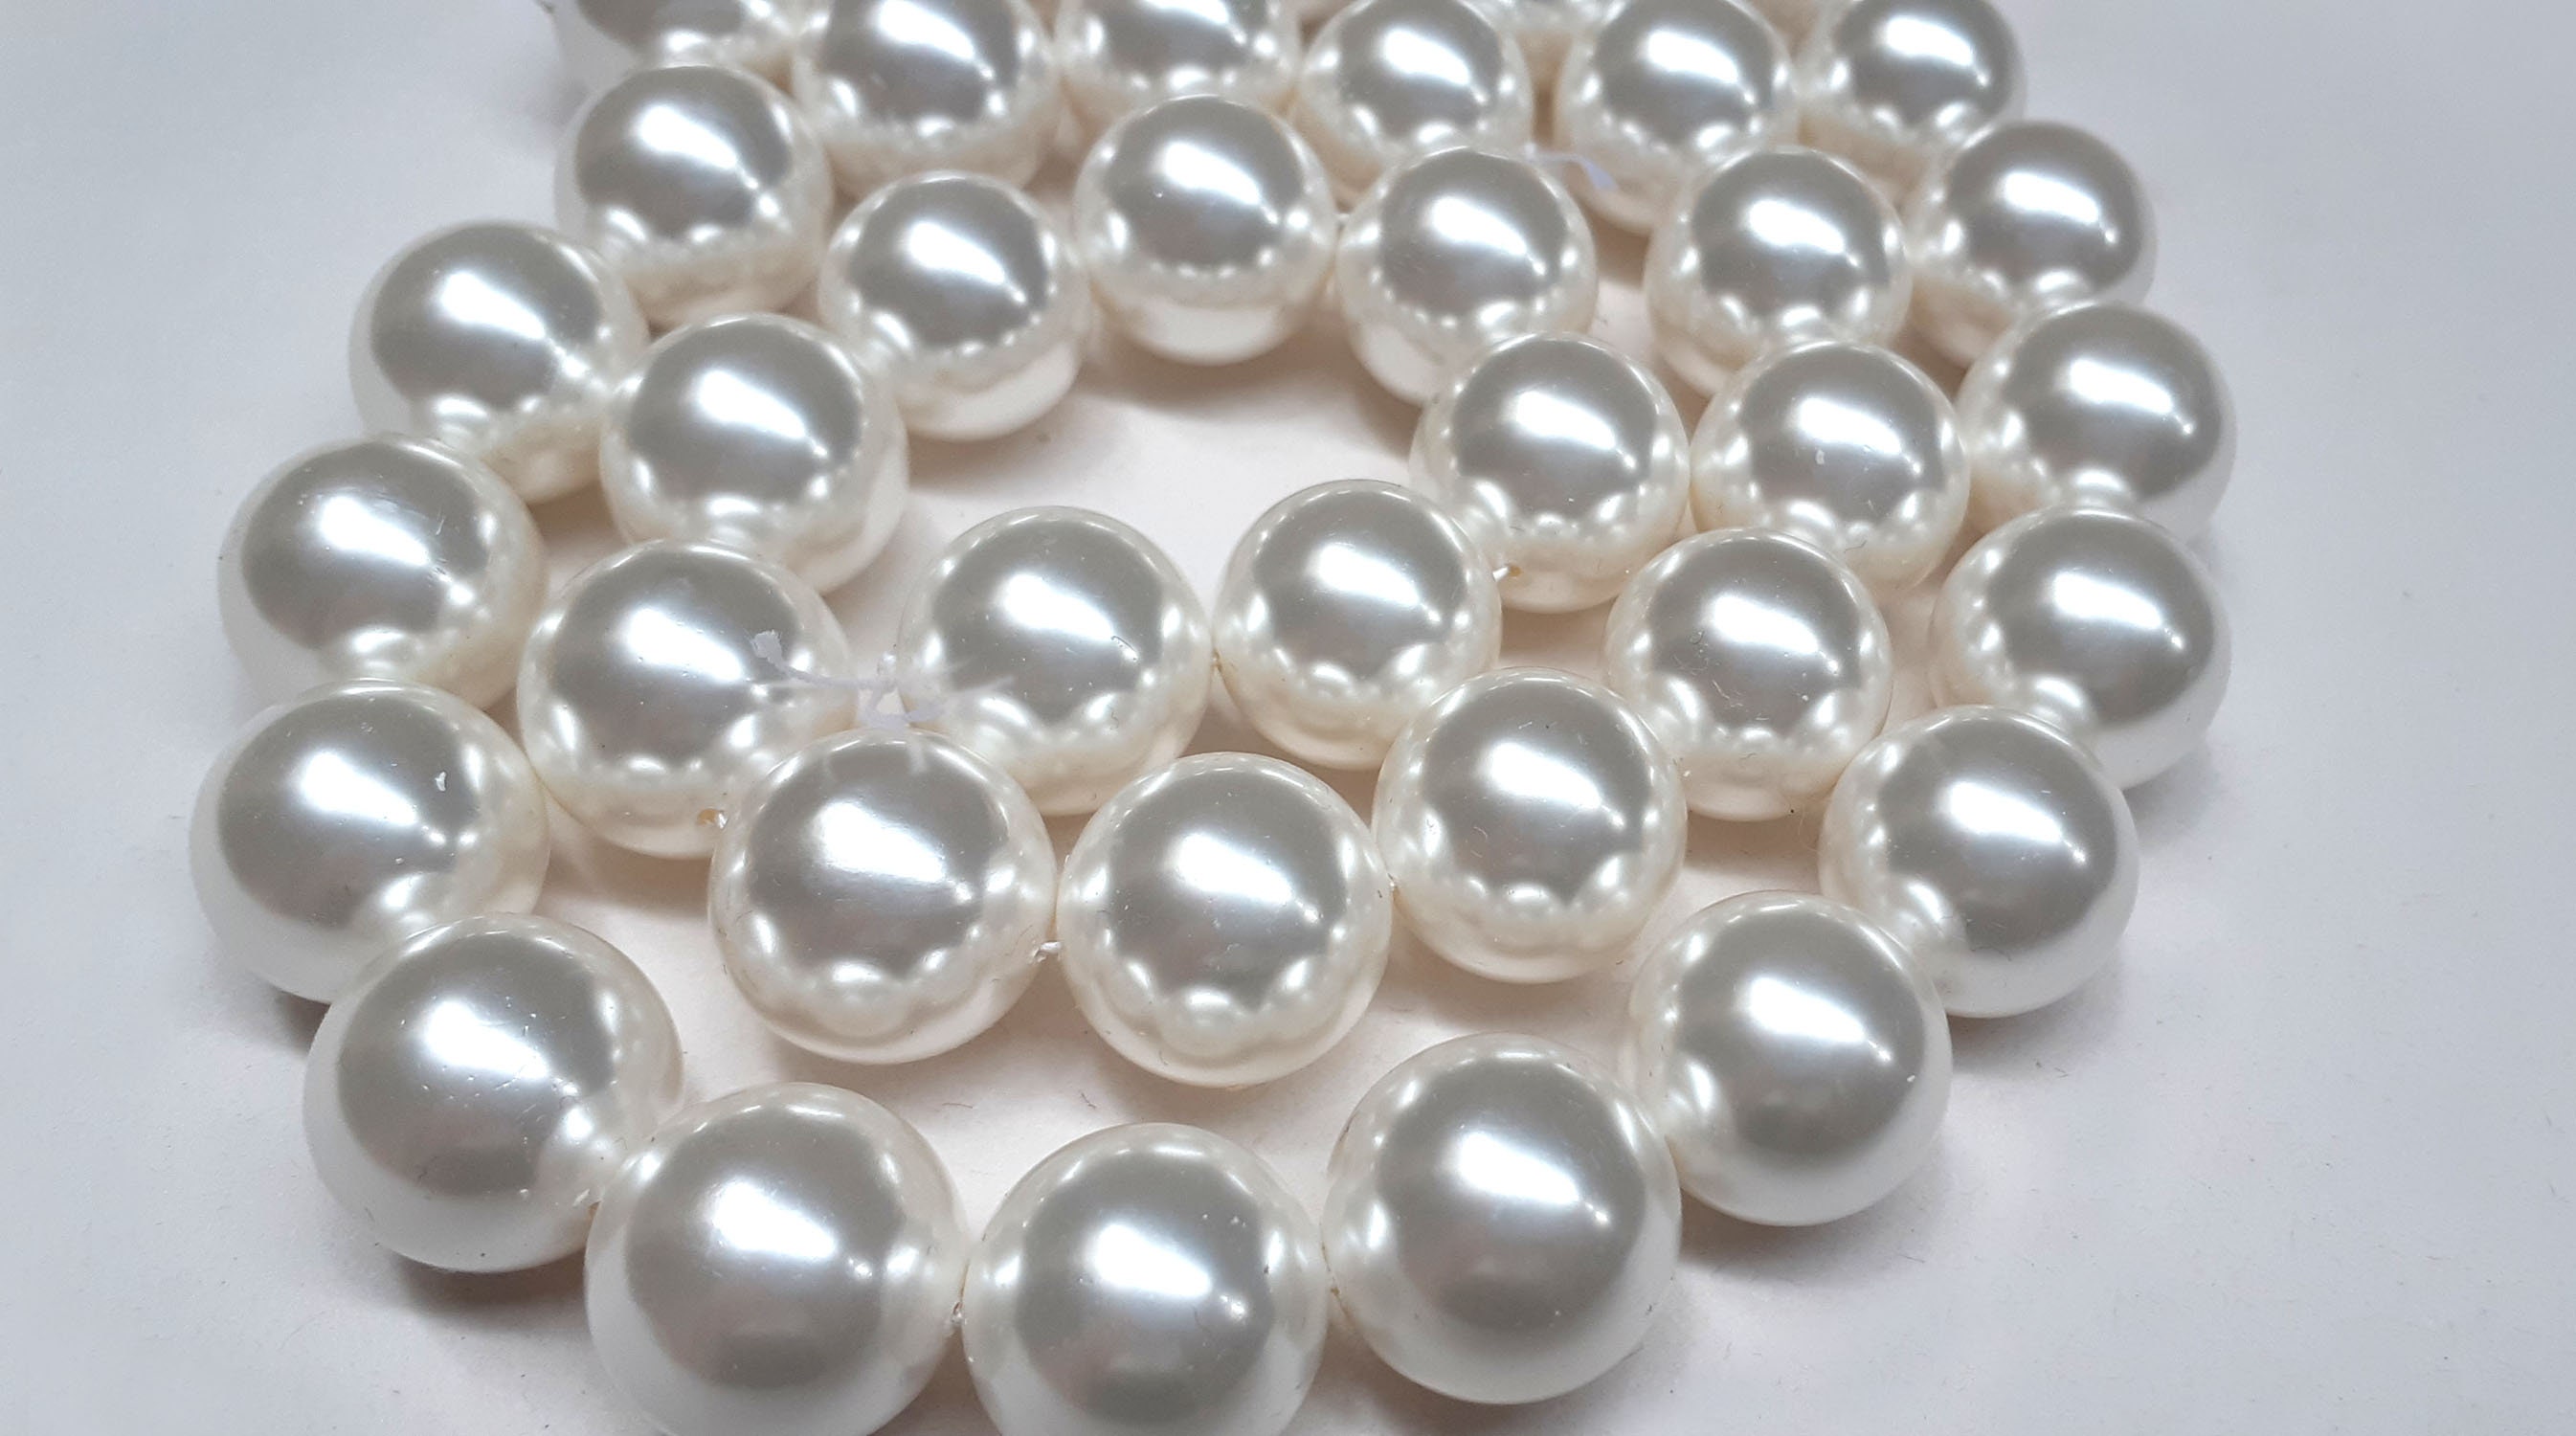 Anlan-angel 100pcs 20mm White Pearl Beads,Loose Pearl Spacer Beads with Hole Big Size Faux Pearls Round White Beads for DIY Craft Bracele